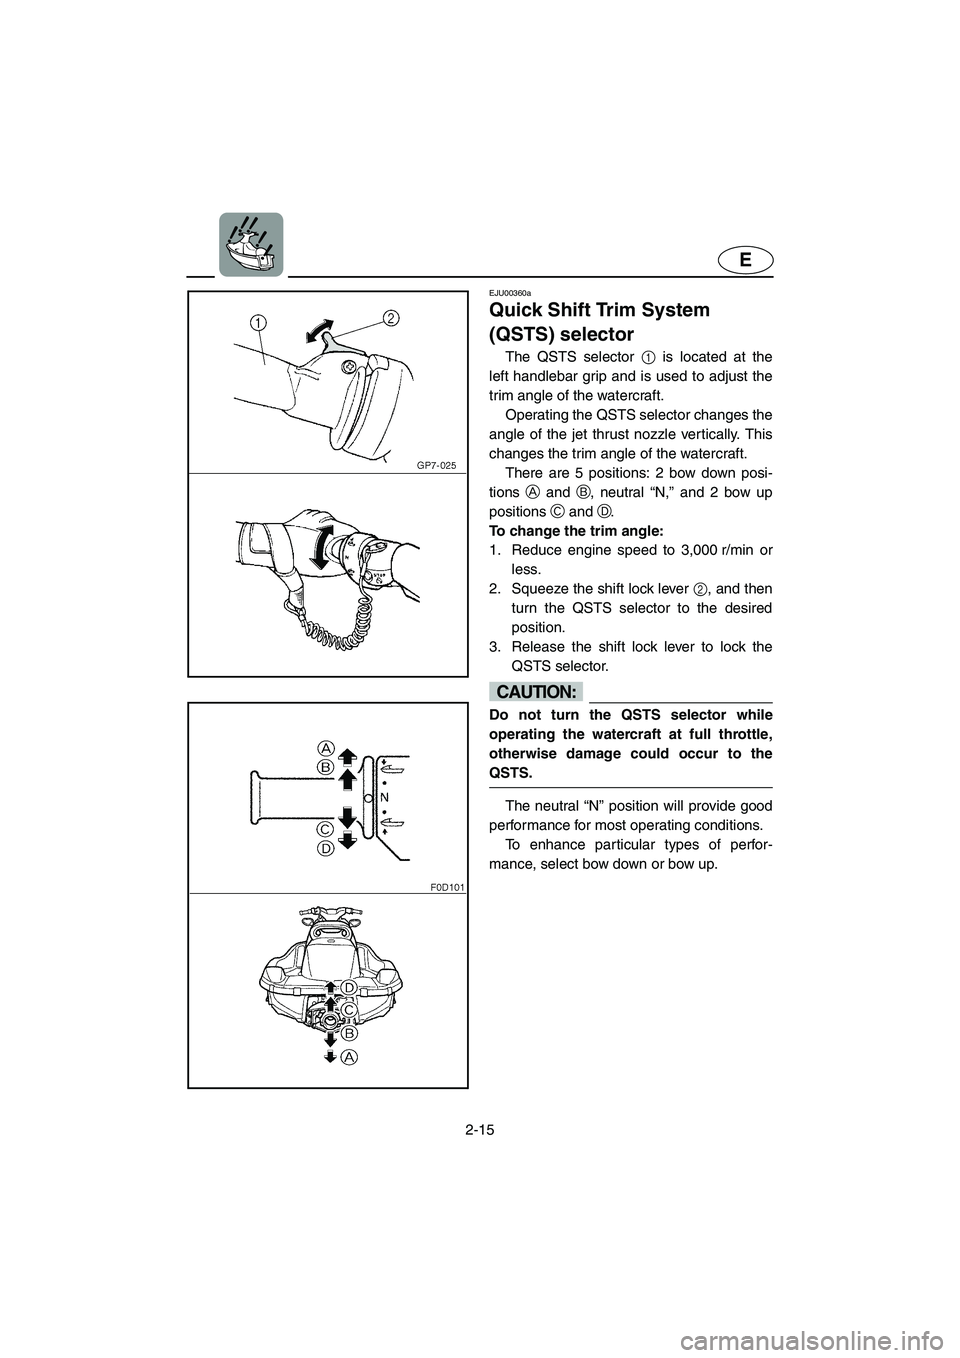 YAMAHA XL 800 2001  Owners Manual 2-15
E
EJU00360a
Quick Shift Trim System 
(QSTS) selector
The QSTS selector 1 is located at the
left handlebar grip and is used to adjust the
trim angle of the watercraft.
Operating the QSTS selector 